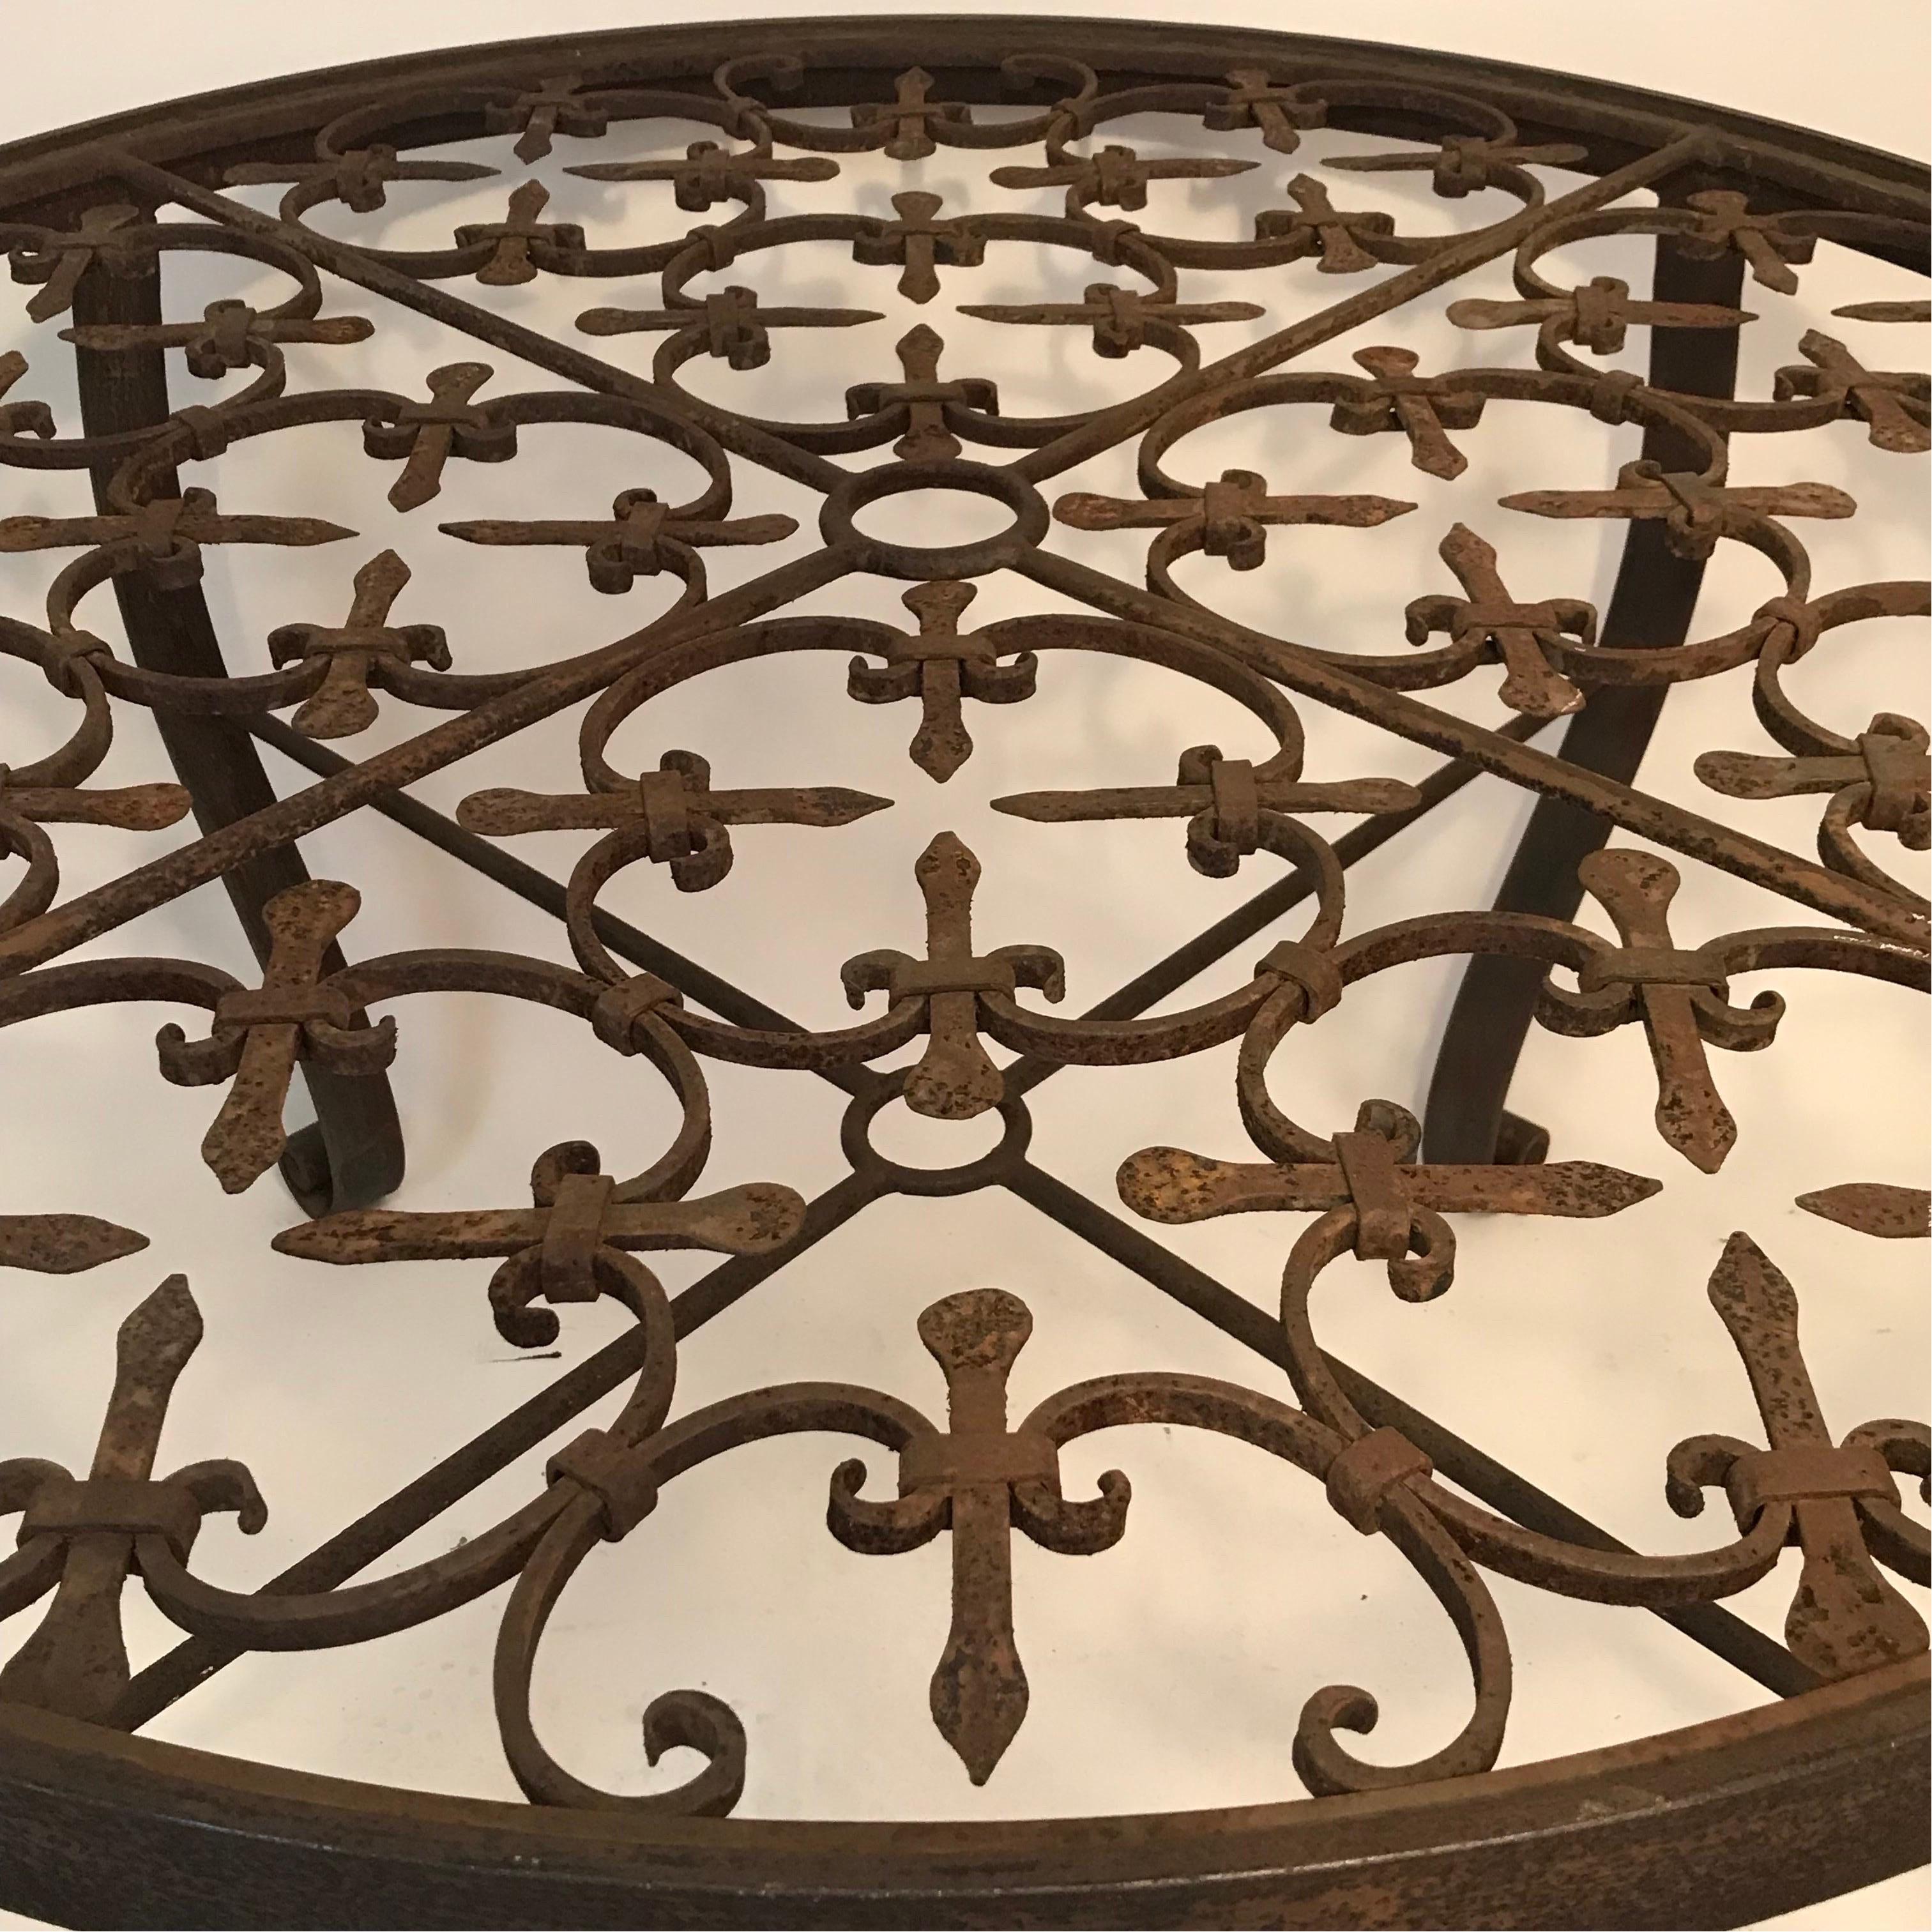 Hand-Crafted A 20th Century French Gate Repurposed into a Contemporary Iron Garden Table 